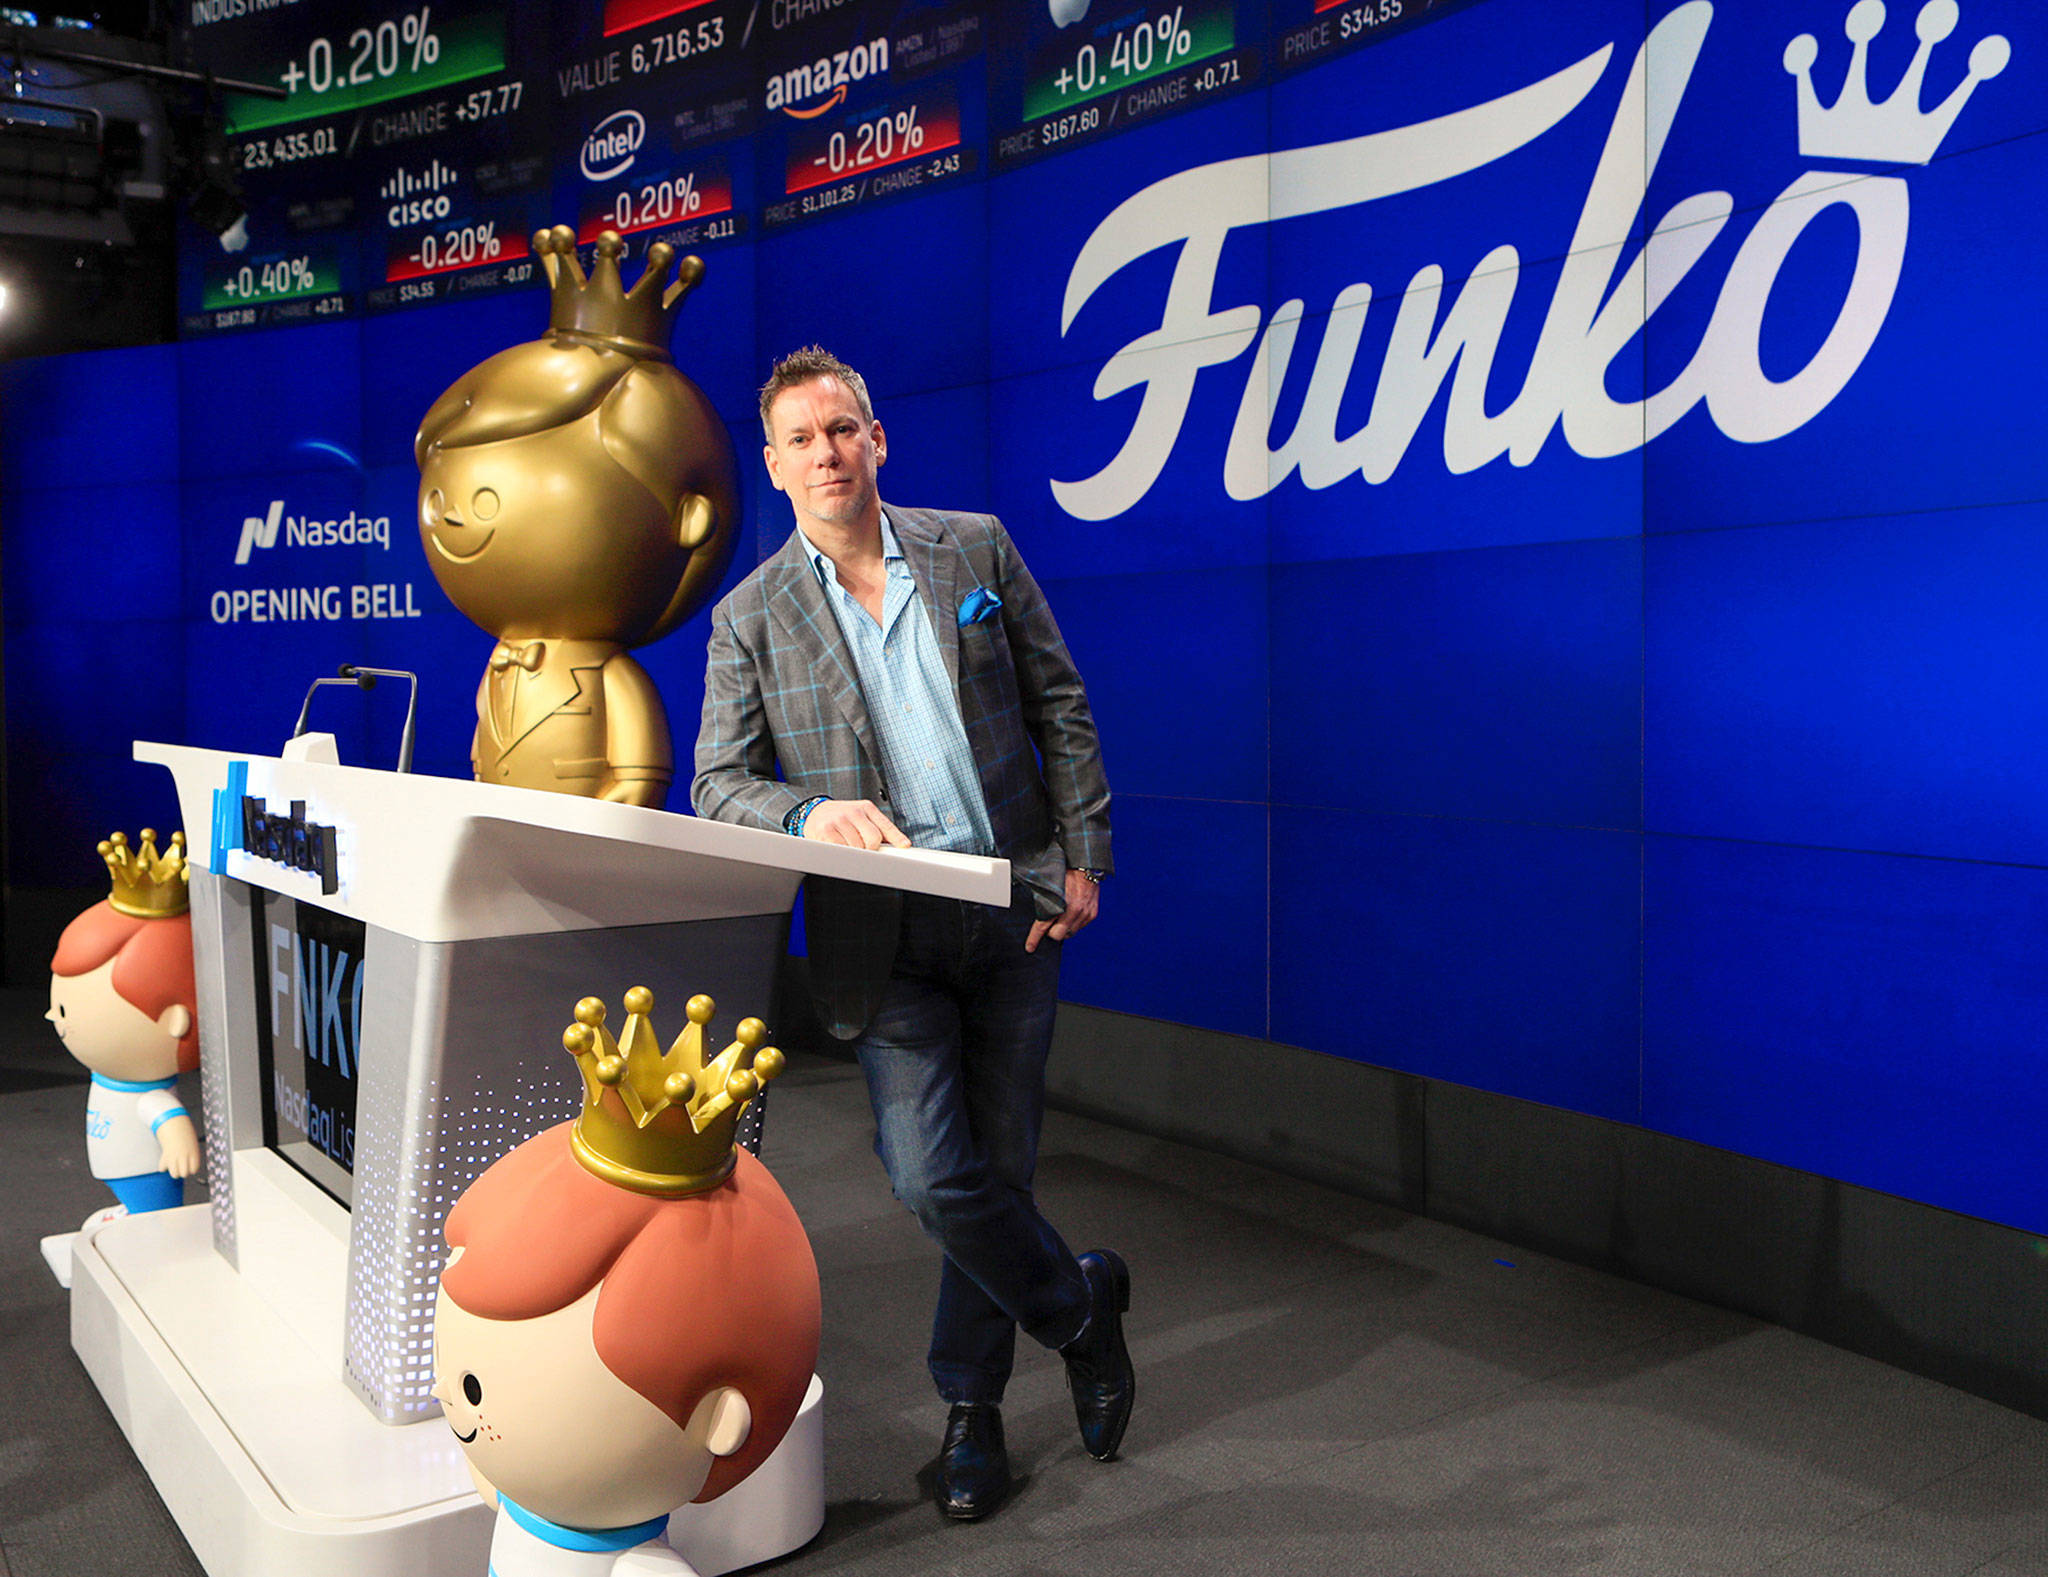 Funko reports $2.2 million net income in first quarter of 2018